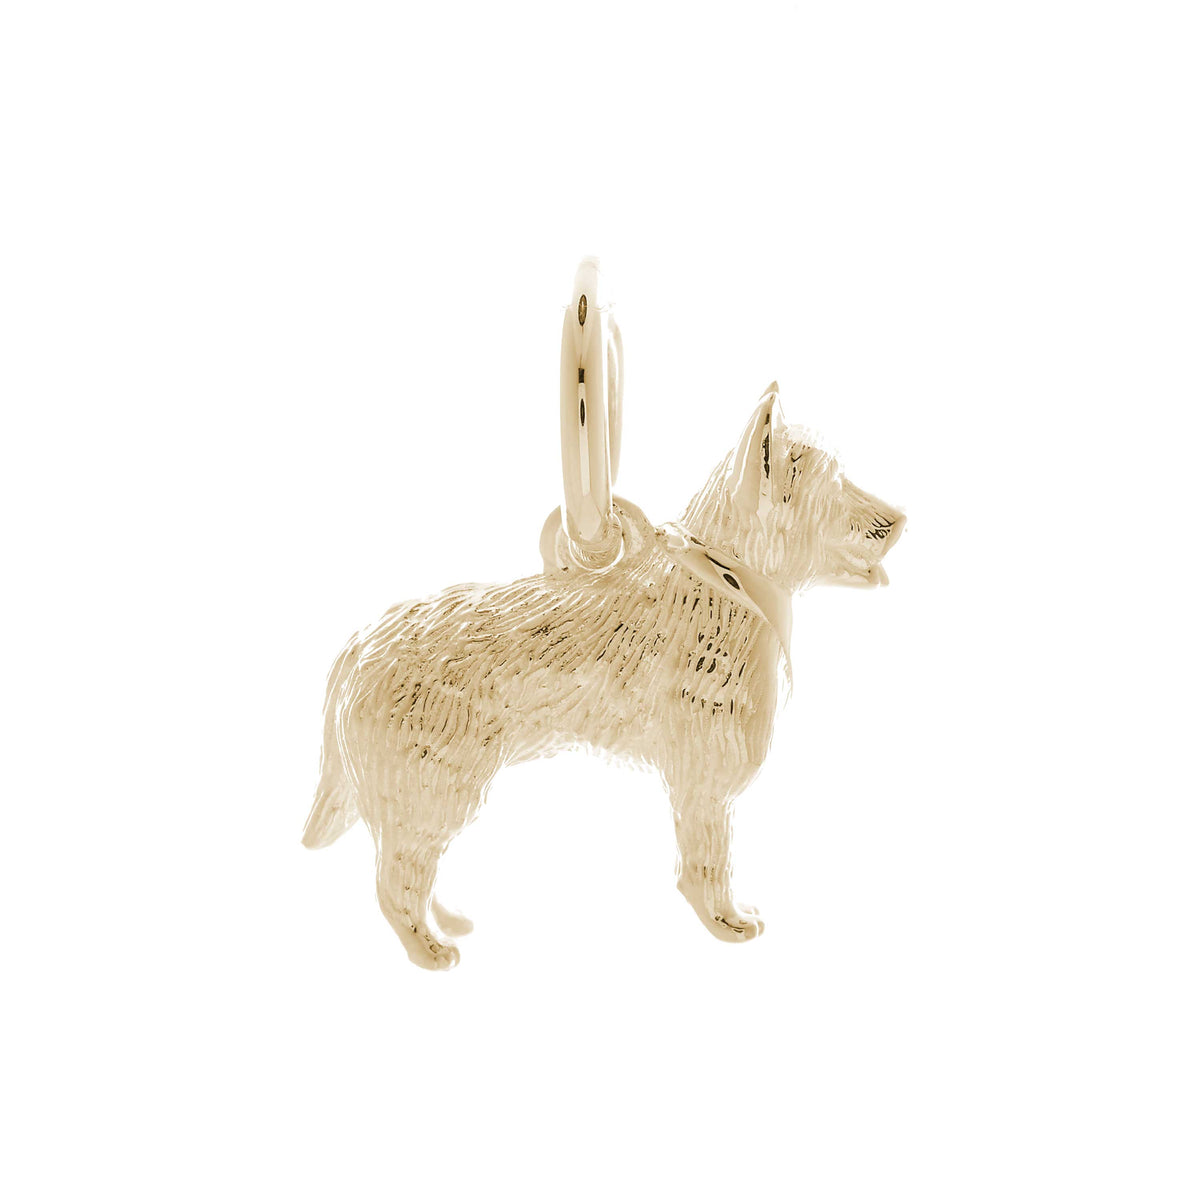 Solid 9ct gold German Shepherd charm with tiny bandana, perfect for a charm bracelet or necklace.